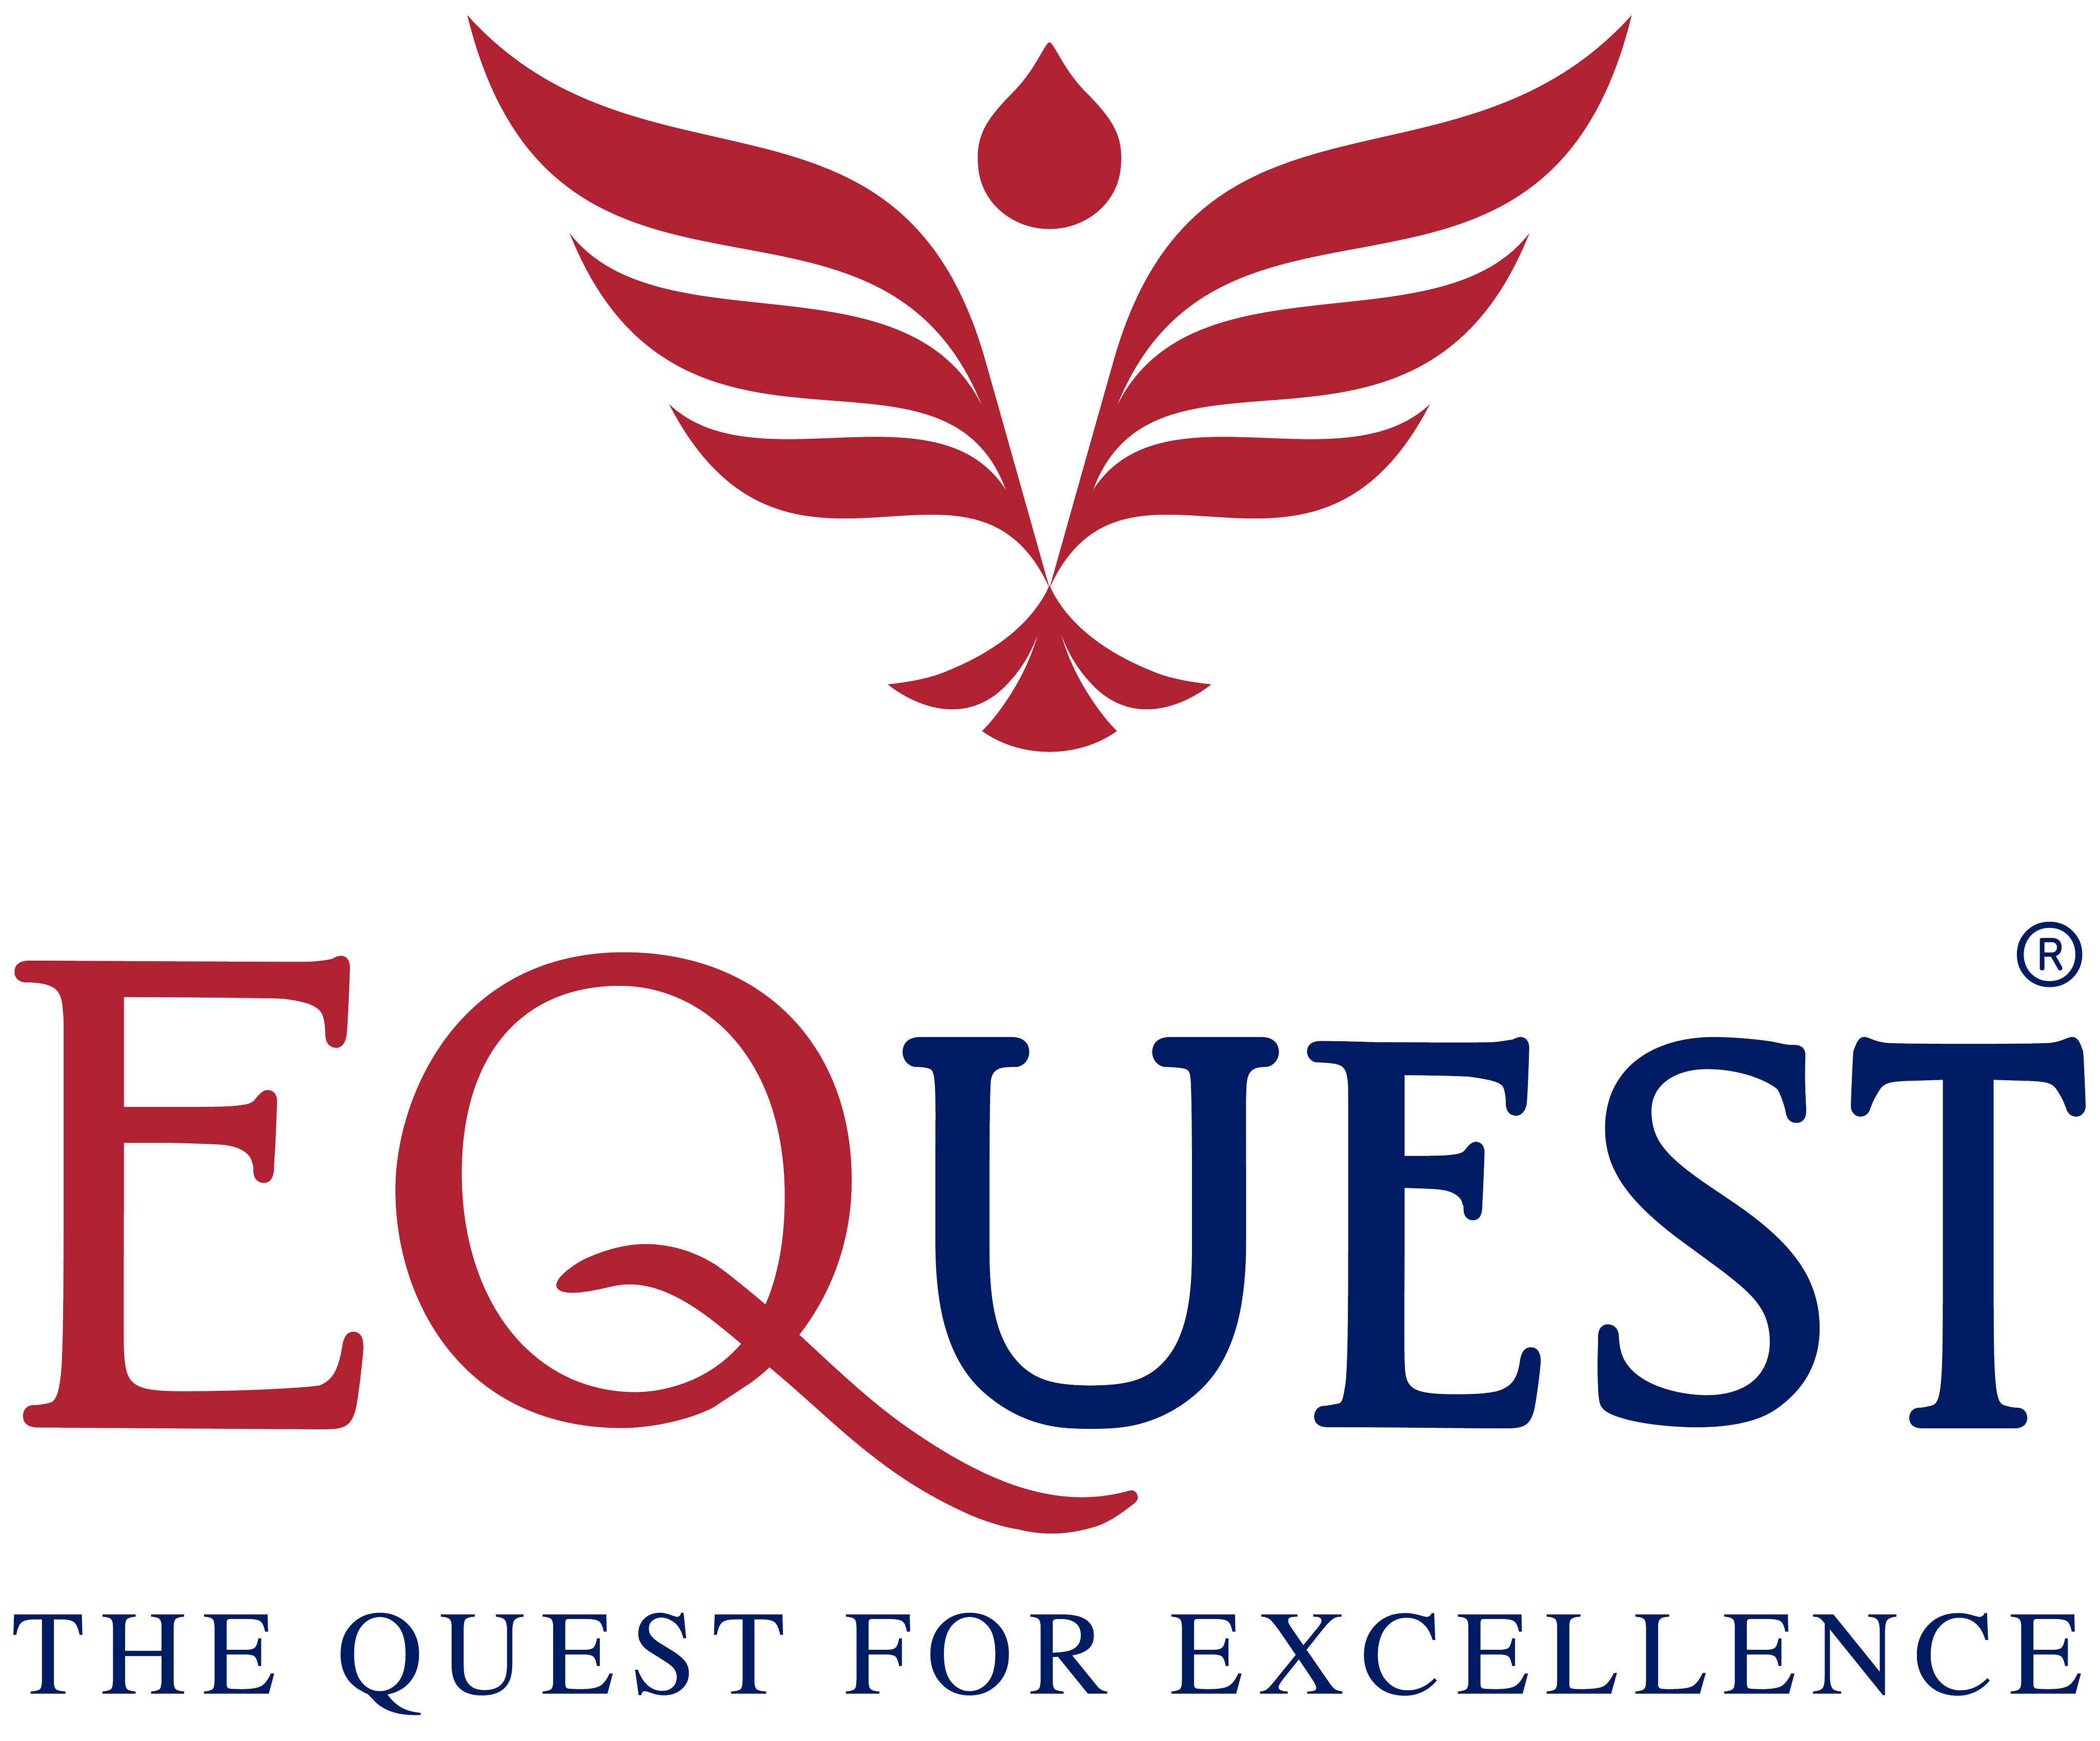 EQuest Education Group - equest.vn